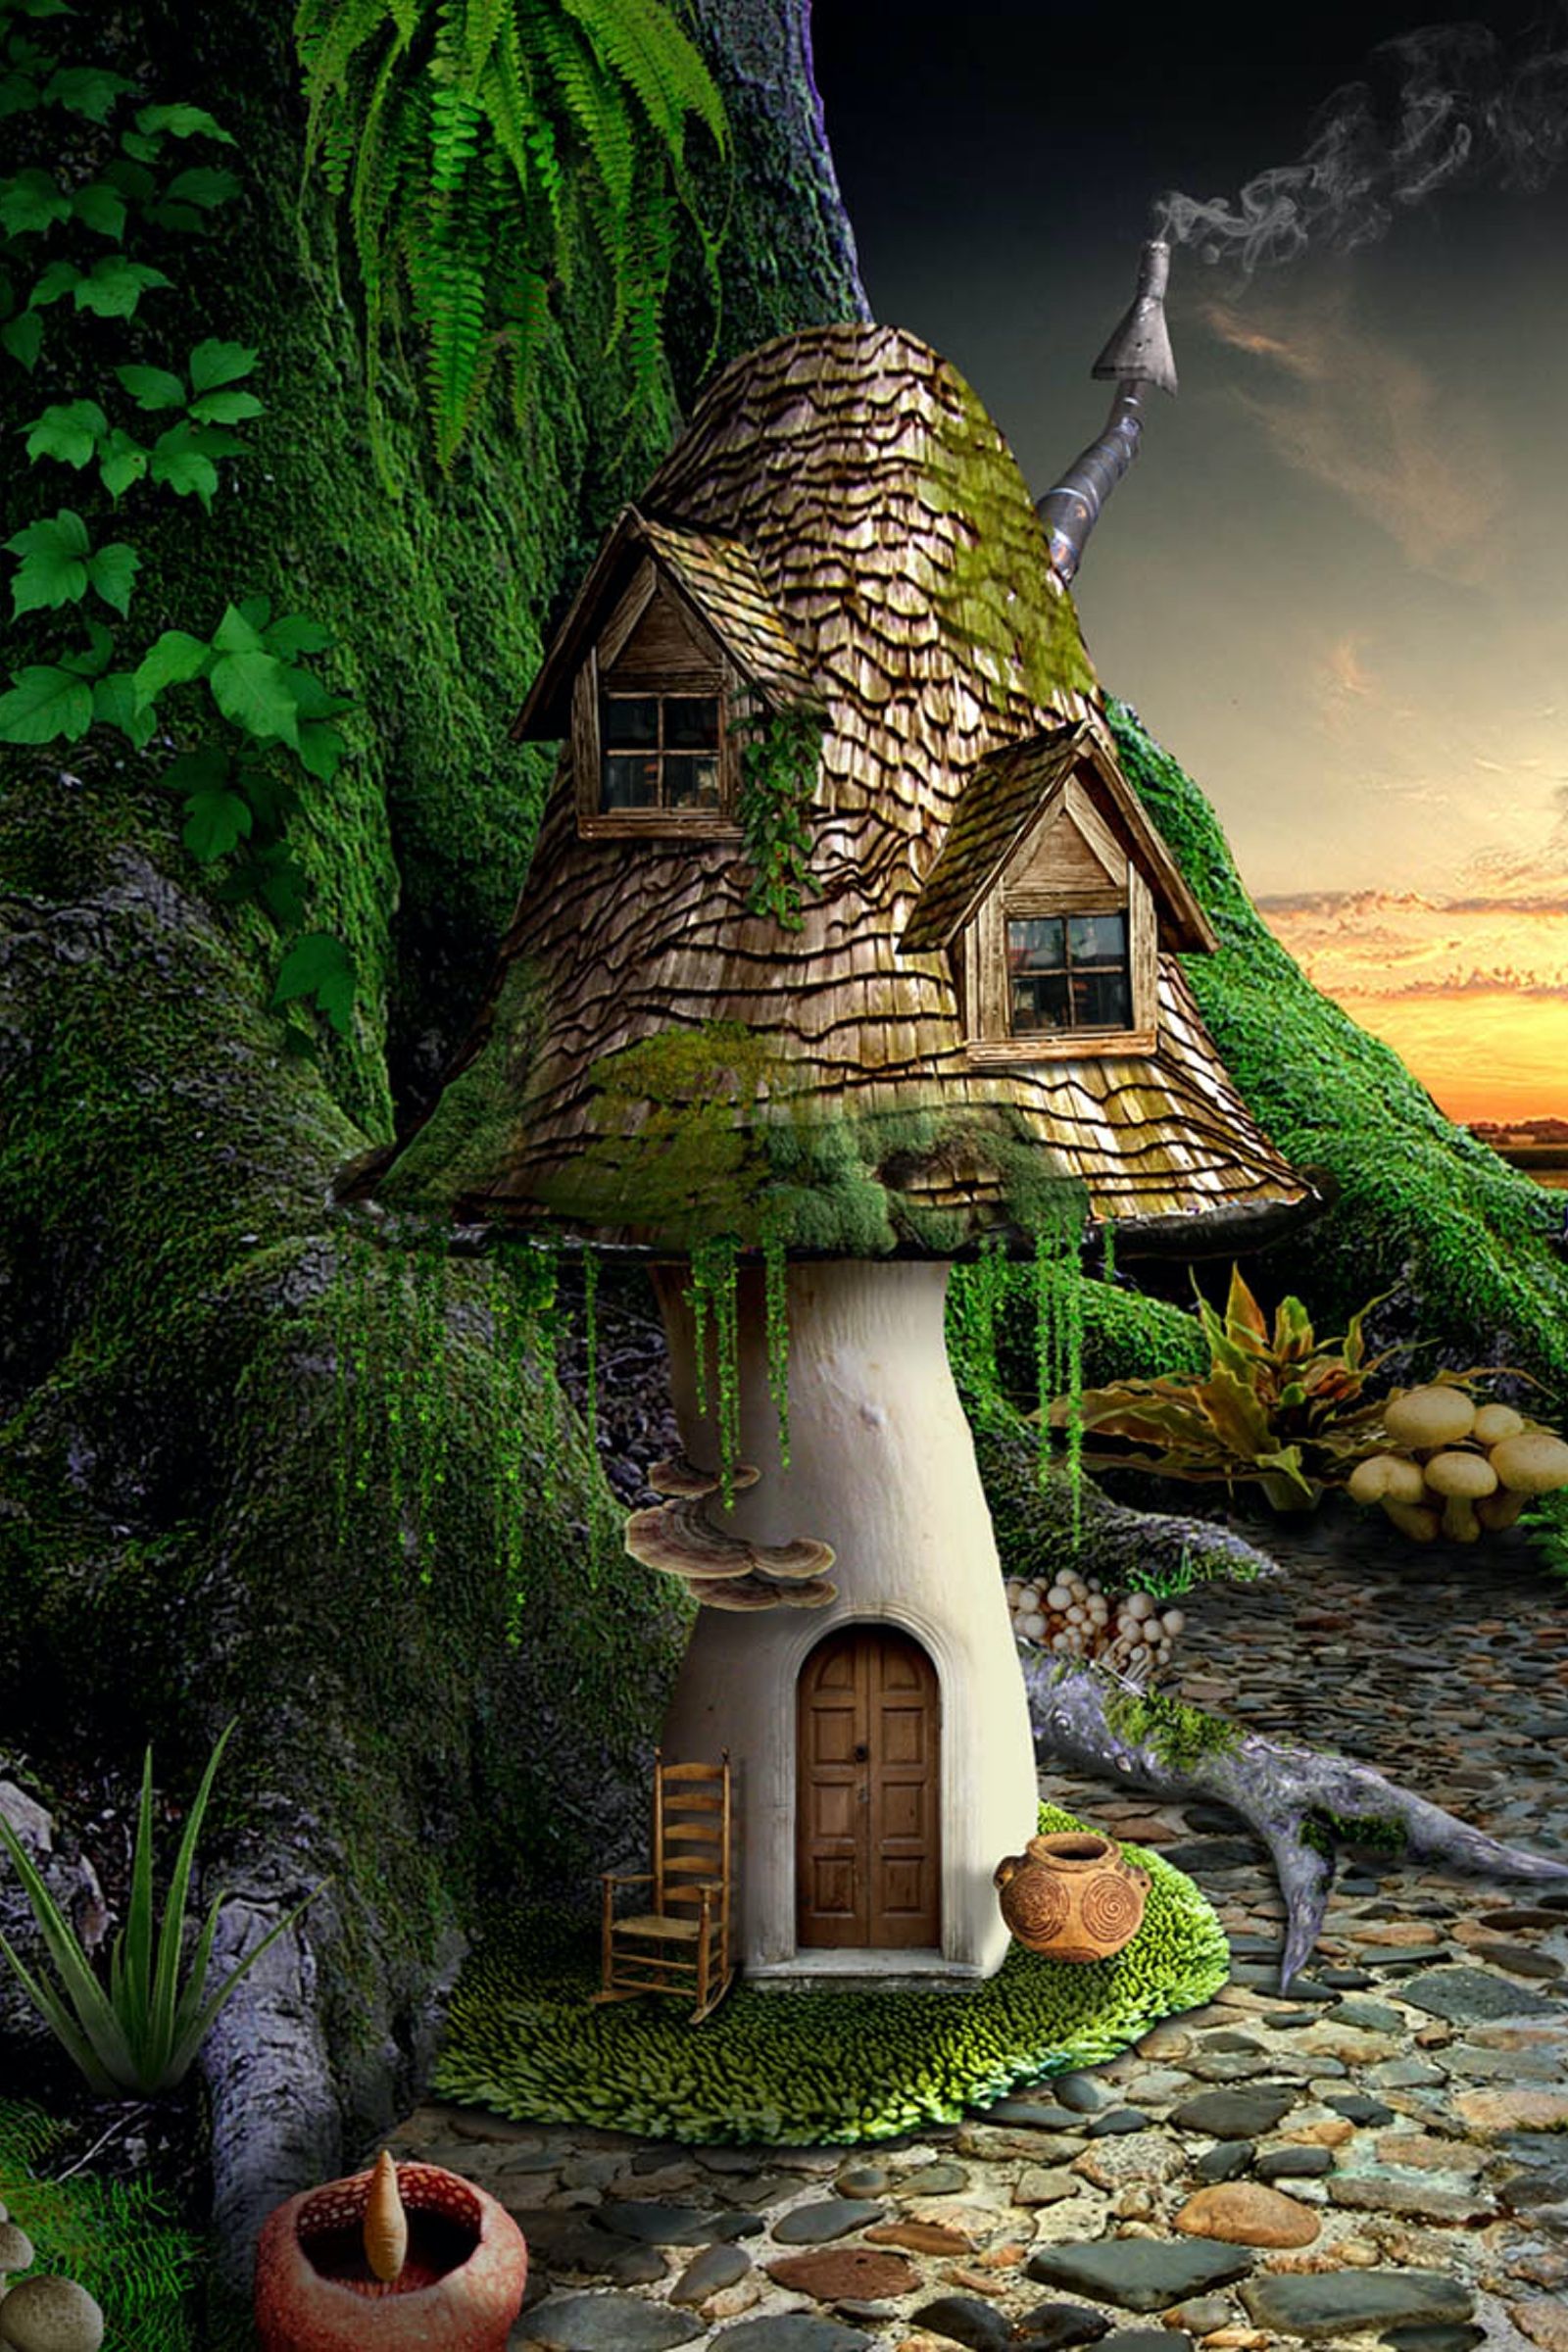 Check Out These Amazing Photoshop Jobs - Making Edible Architecture image 1